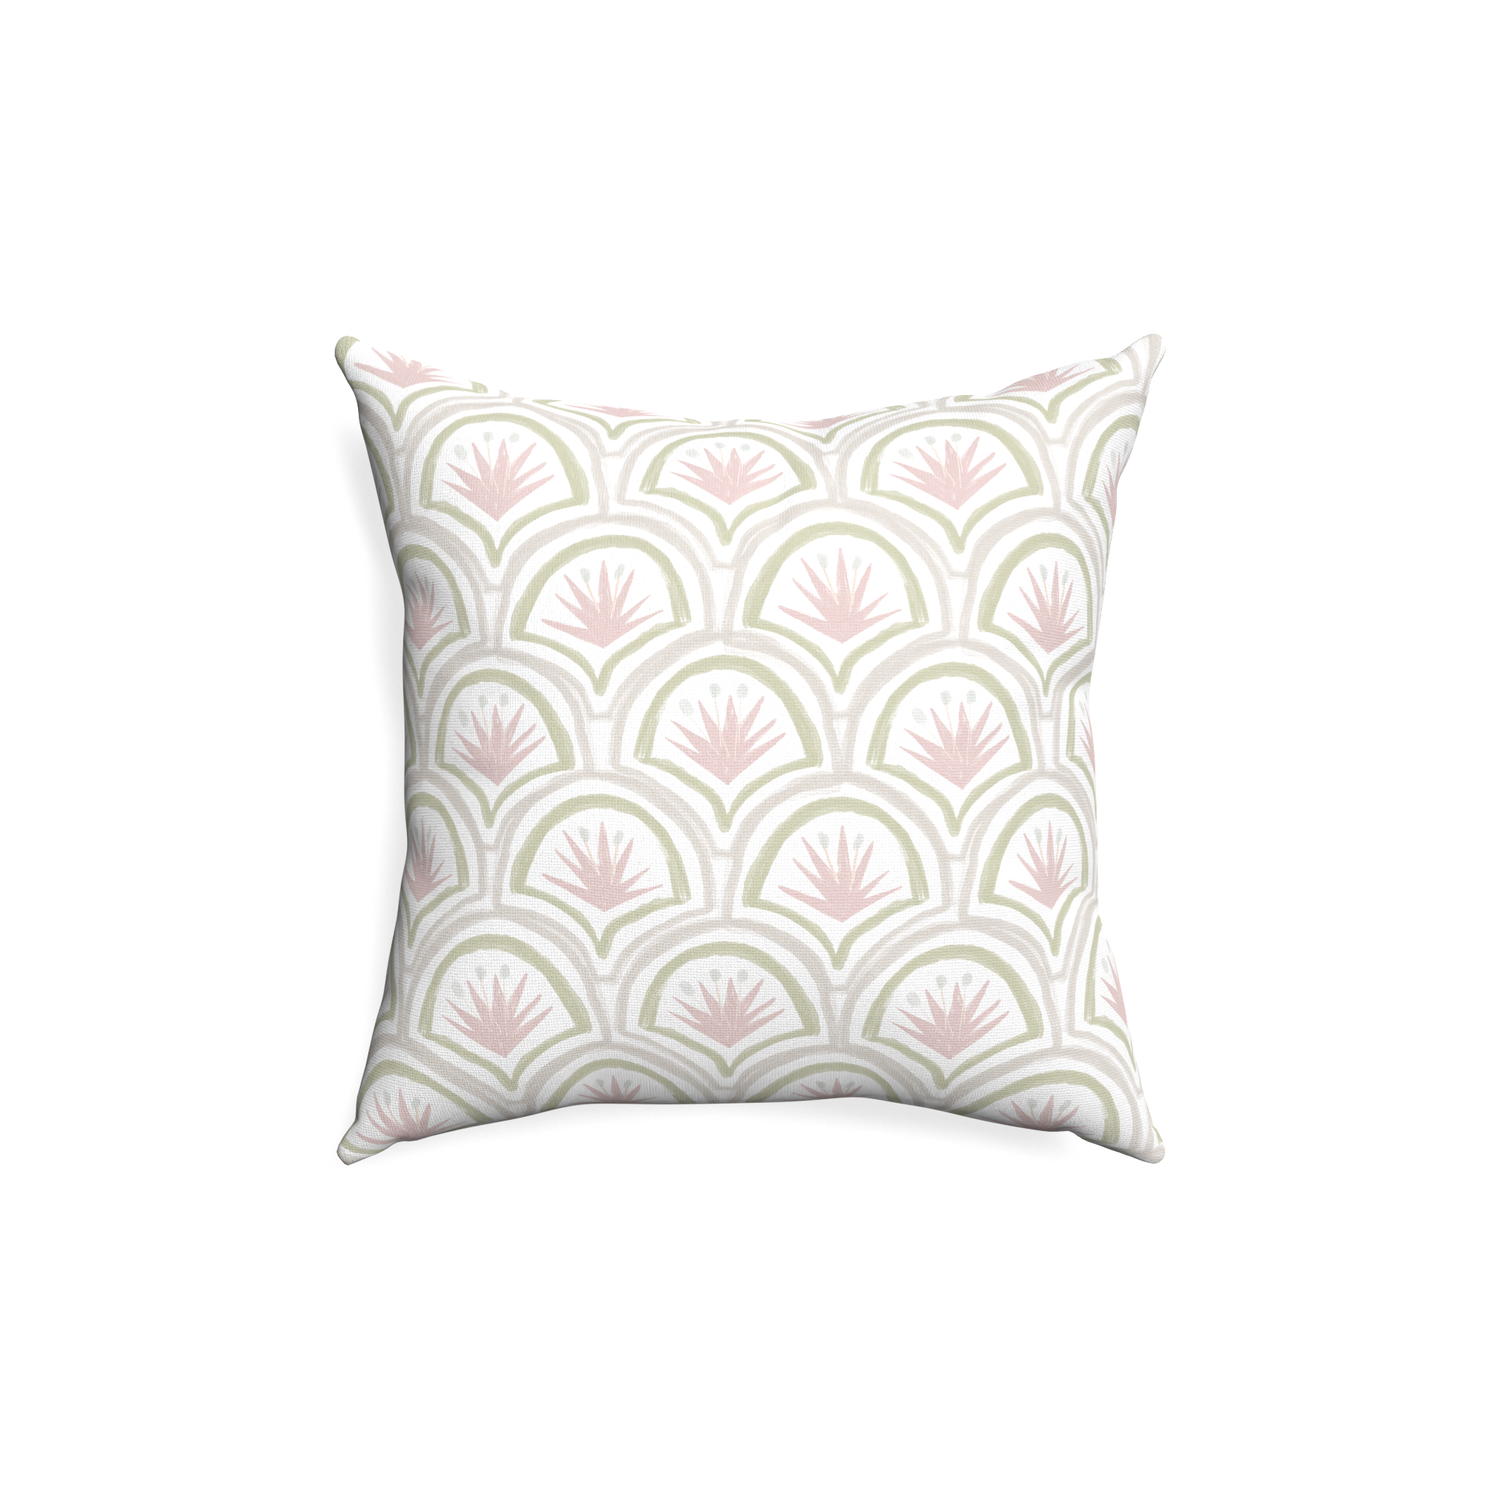 18-square thatcher rose custom pillow with none on white background